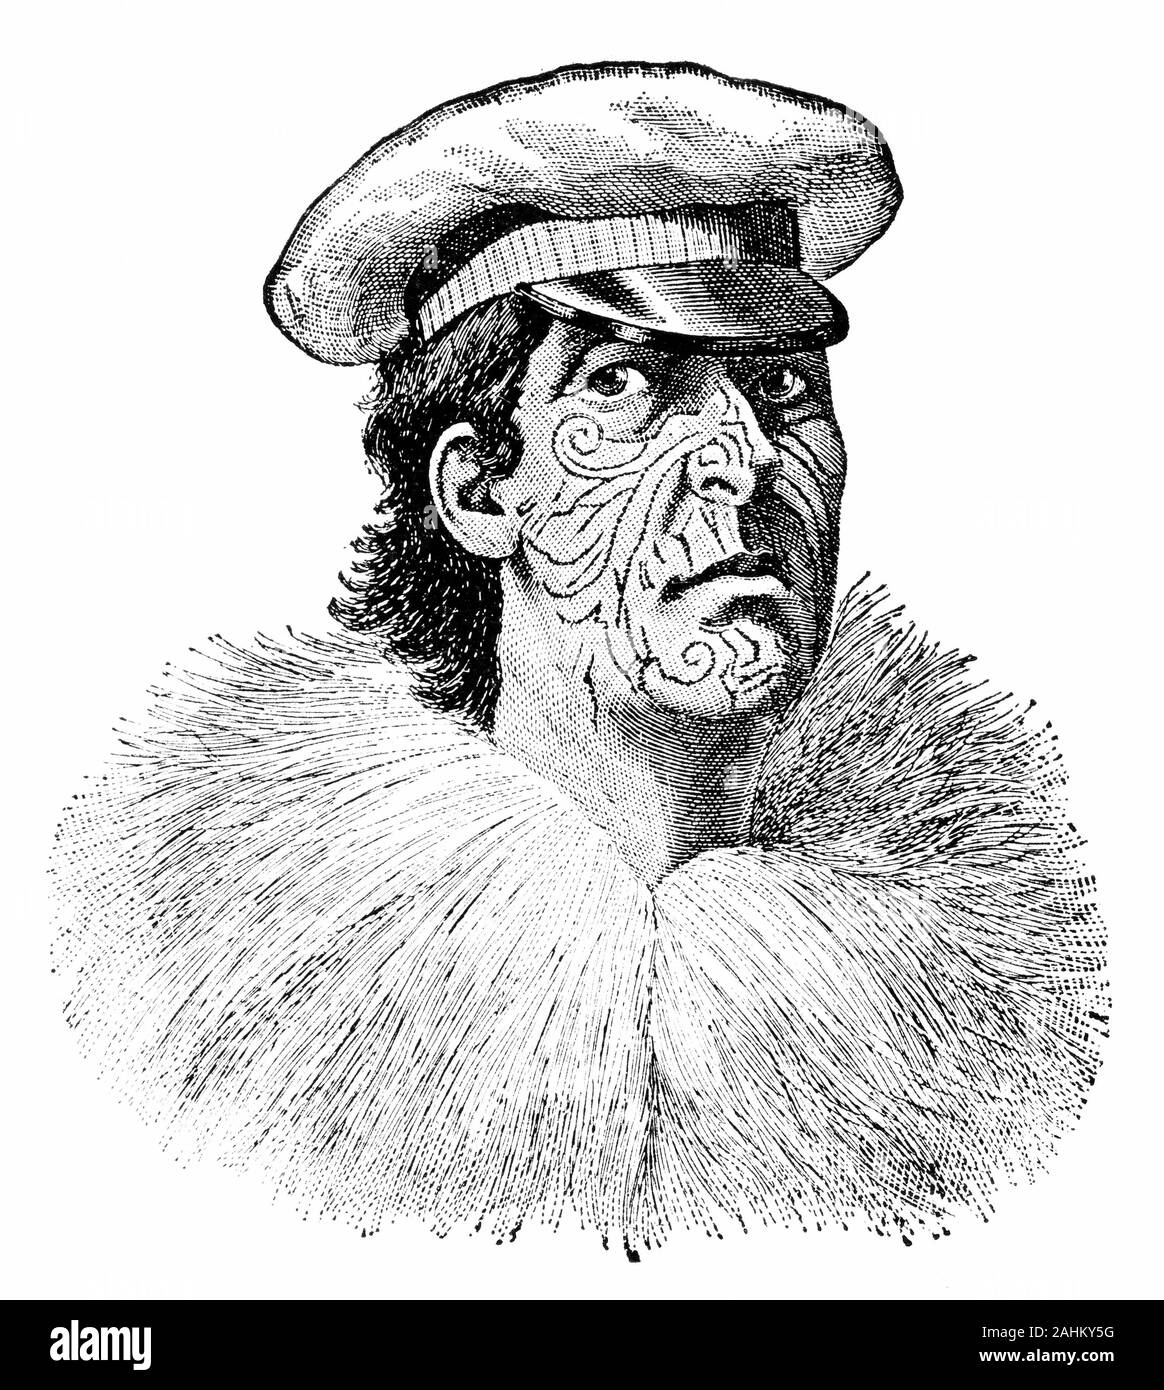 Engraved portrait of Hōne Wiremu Heke Pōkai (c. 1807/1808 – 1850), born Heke Pōkai and later often referred to as Hōne Heke, a highly influential Māori rangatira (chief) of the Ngāpuhi iwi (tribe) and a war leader in the North Island of New Zealand; he is chiefly remembered for starting the Flagstaff War of 1845-46. Stock Photo